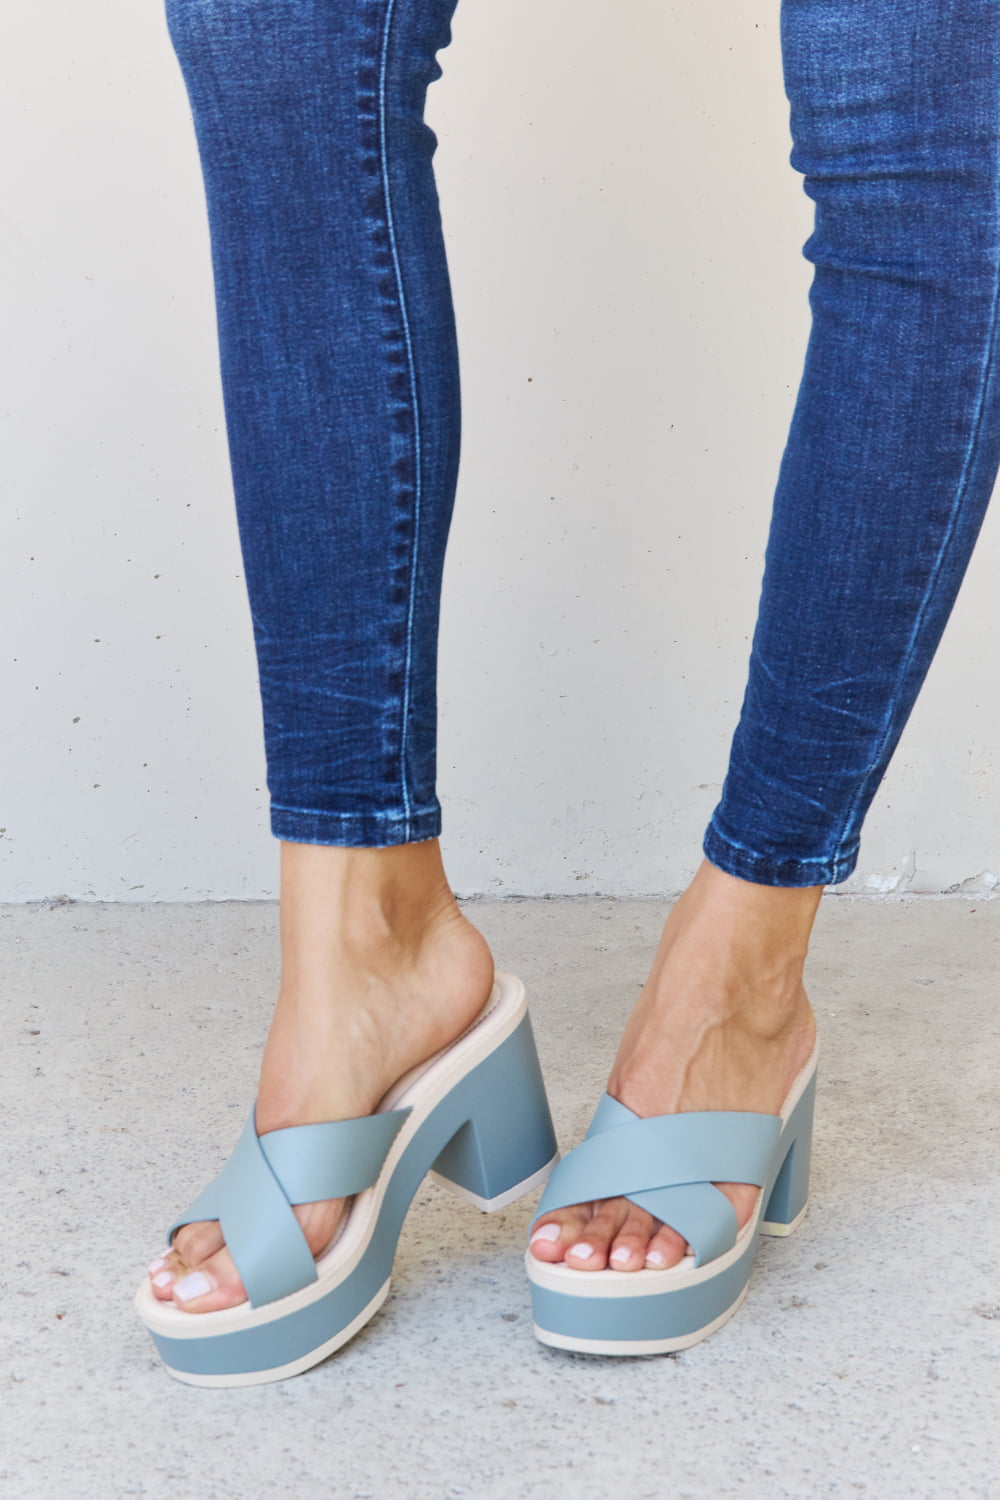 Light Gray Weeboo Cherish The Moments Contrast Platform Sandals in Misty Blue Sentient Beauty Fashions Shoes